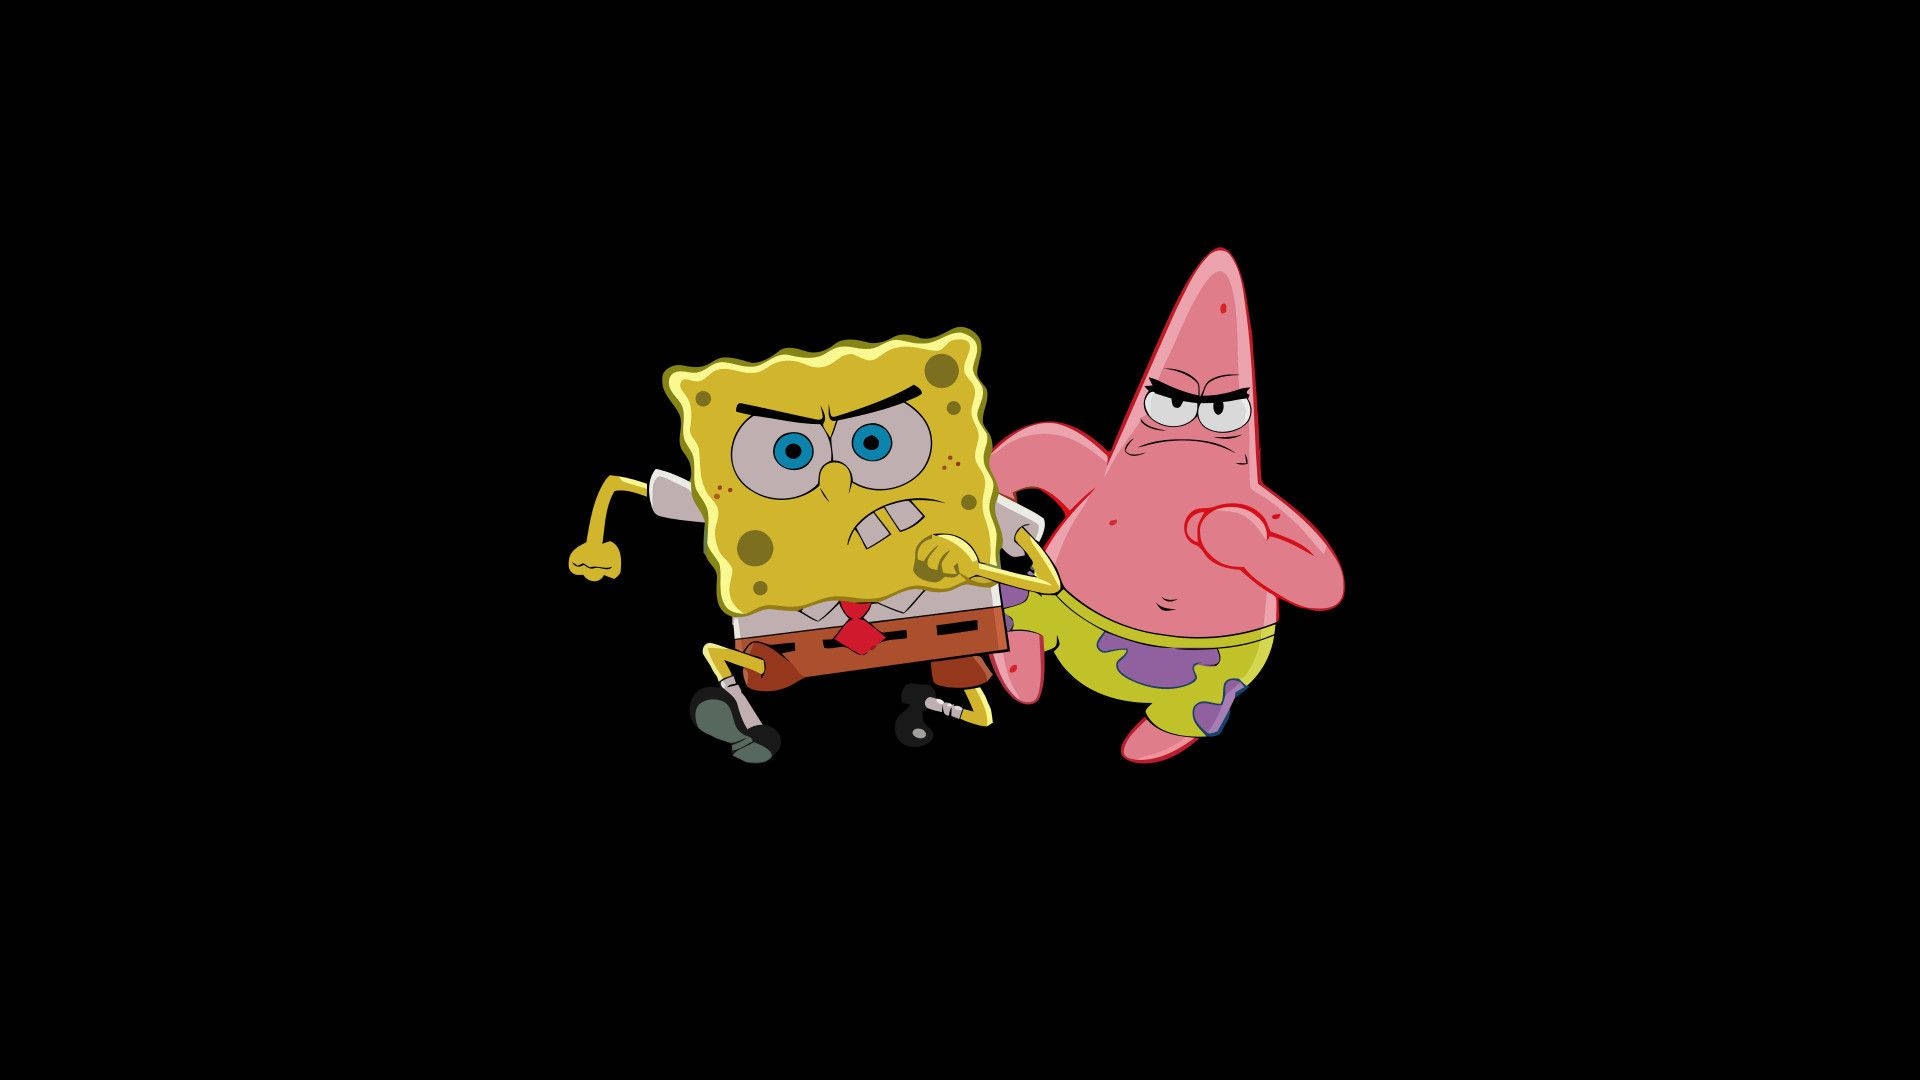 Patrick And Cute Spongebob Angry Faces Background